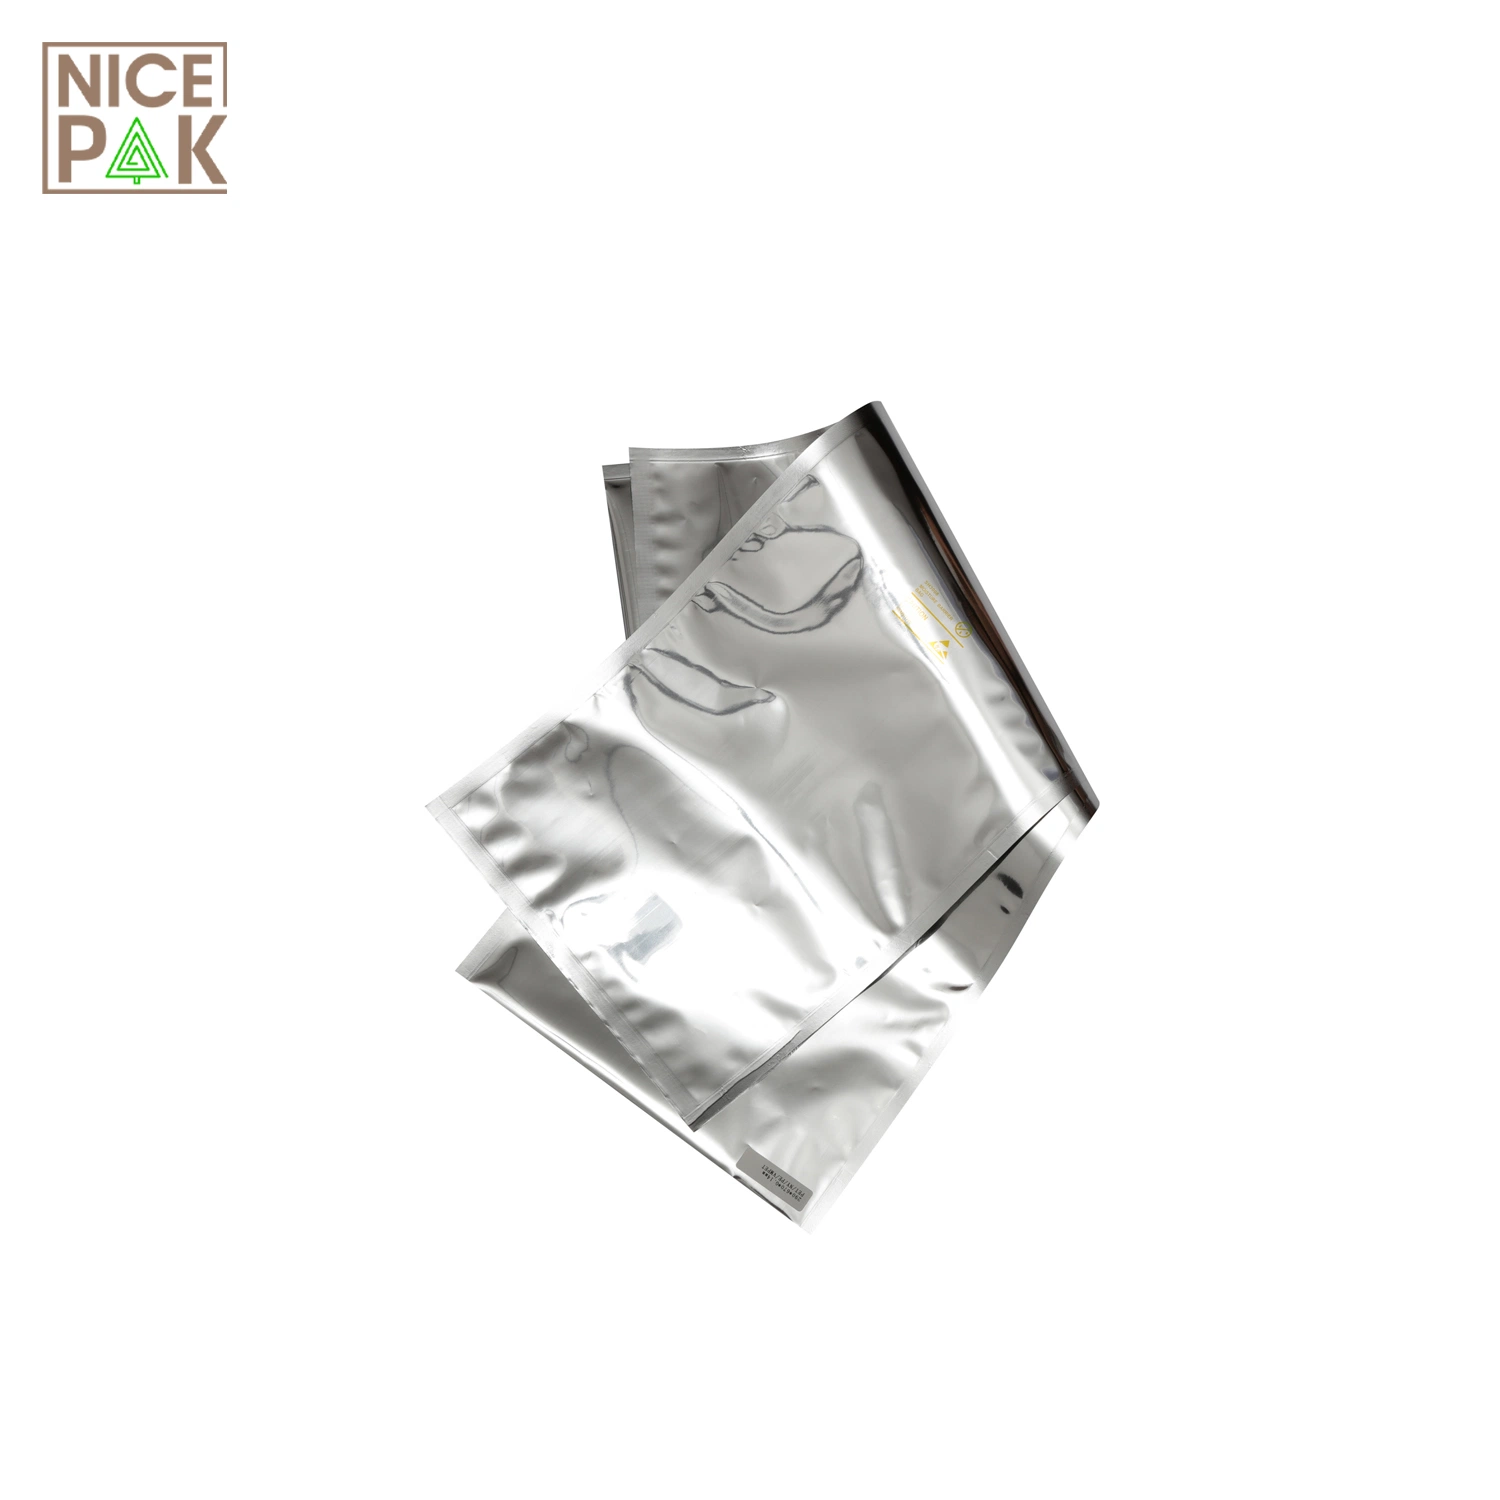 RoHS/Reach Compliant High Barrier Aluminum-Plated ESD Flat Bag for Electric Components